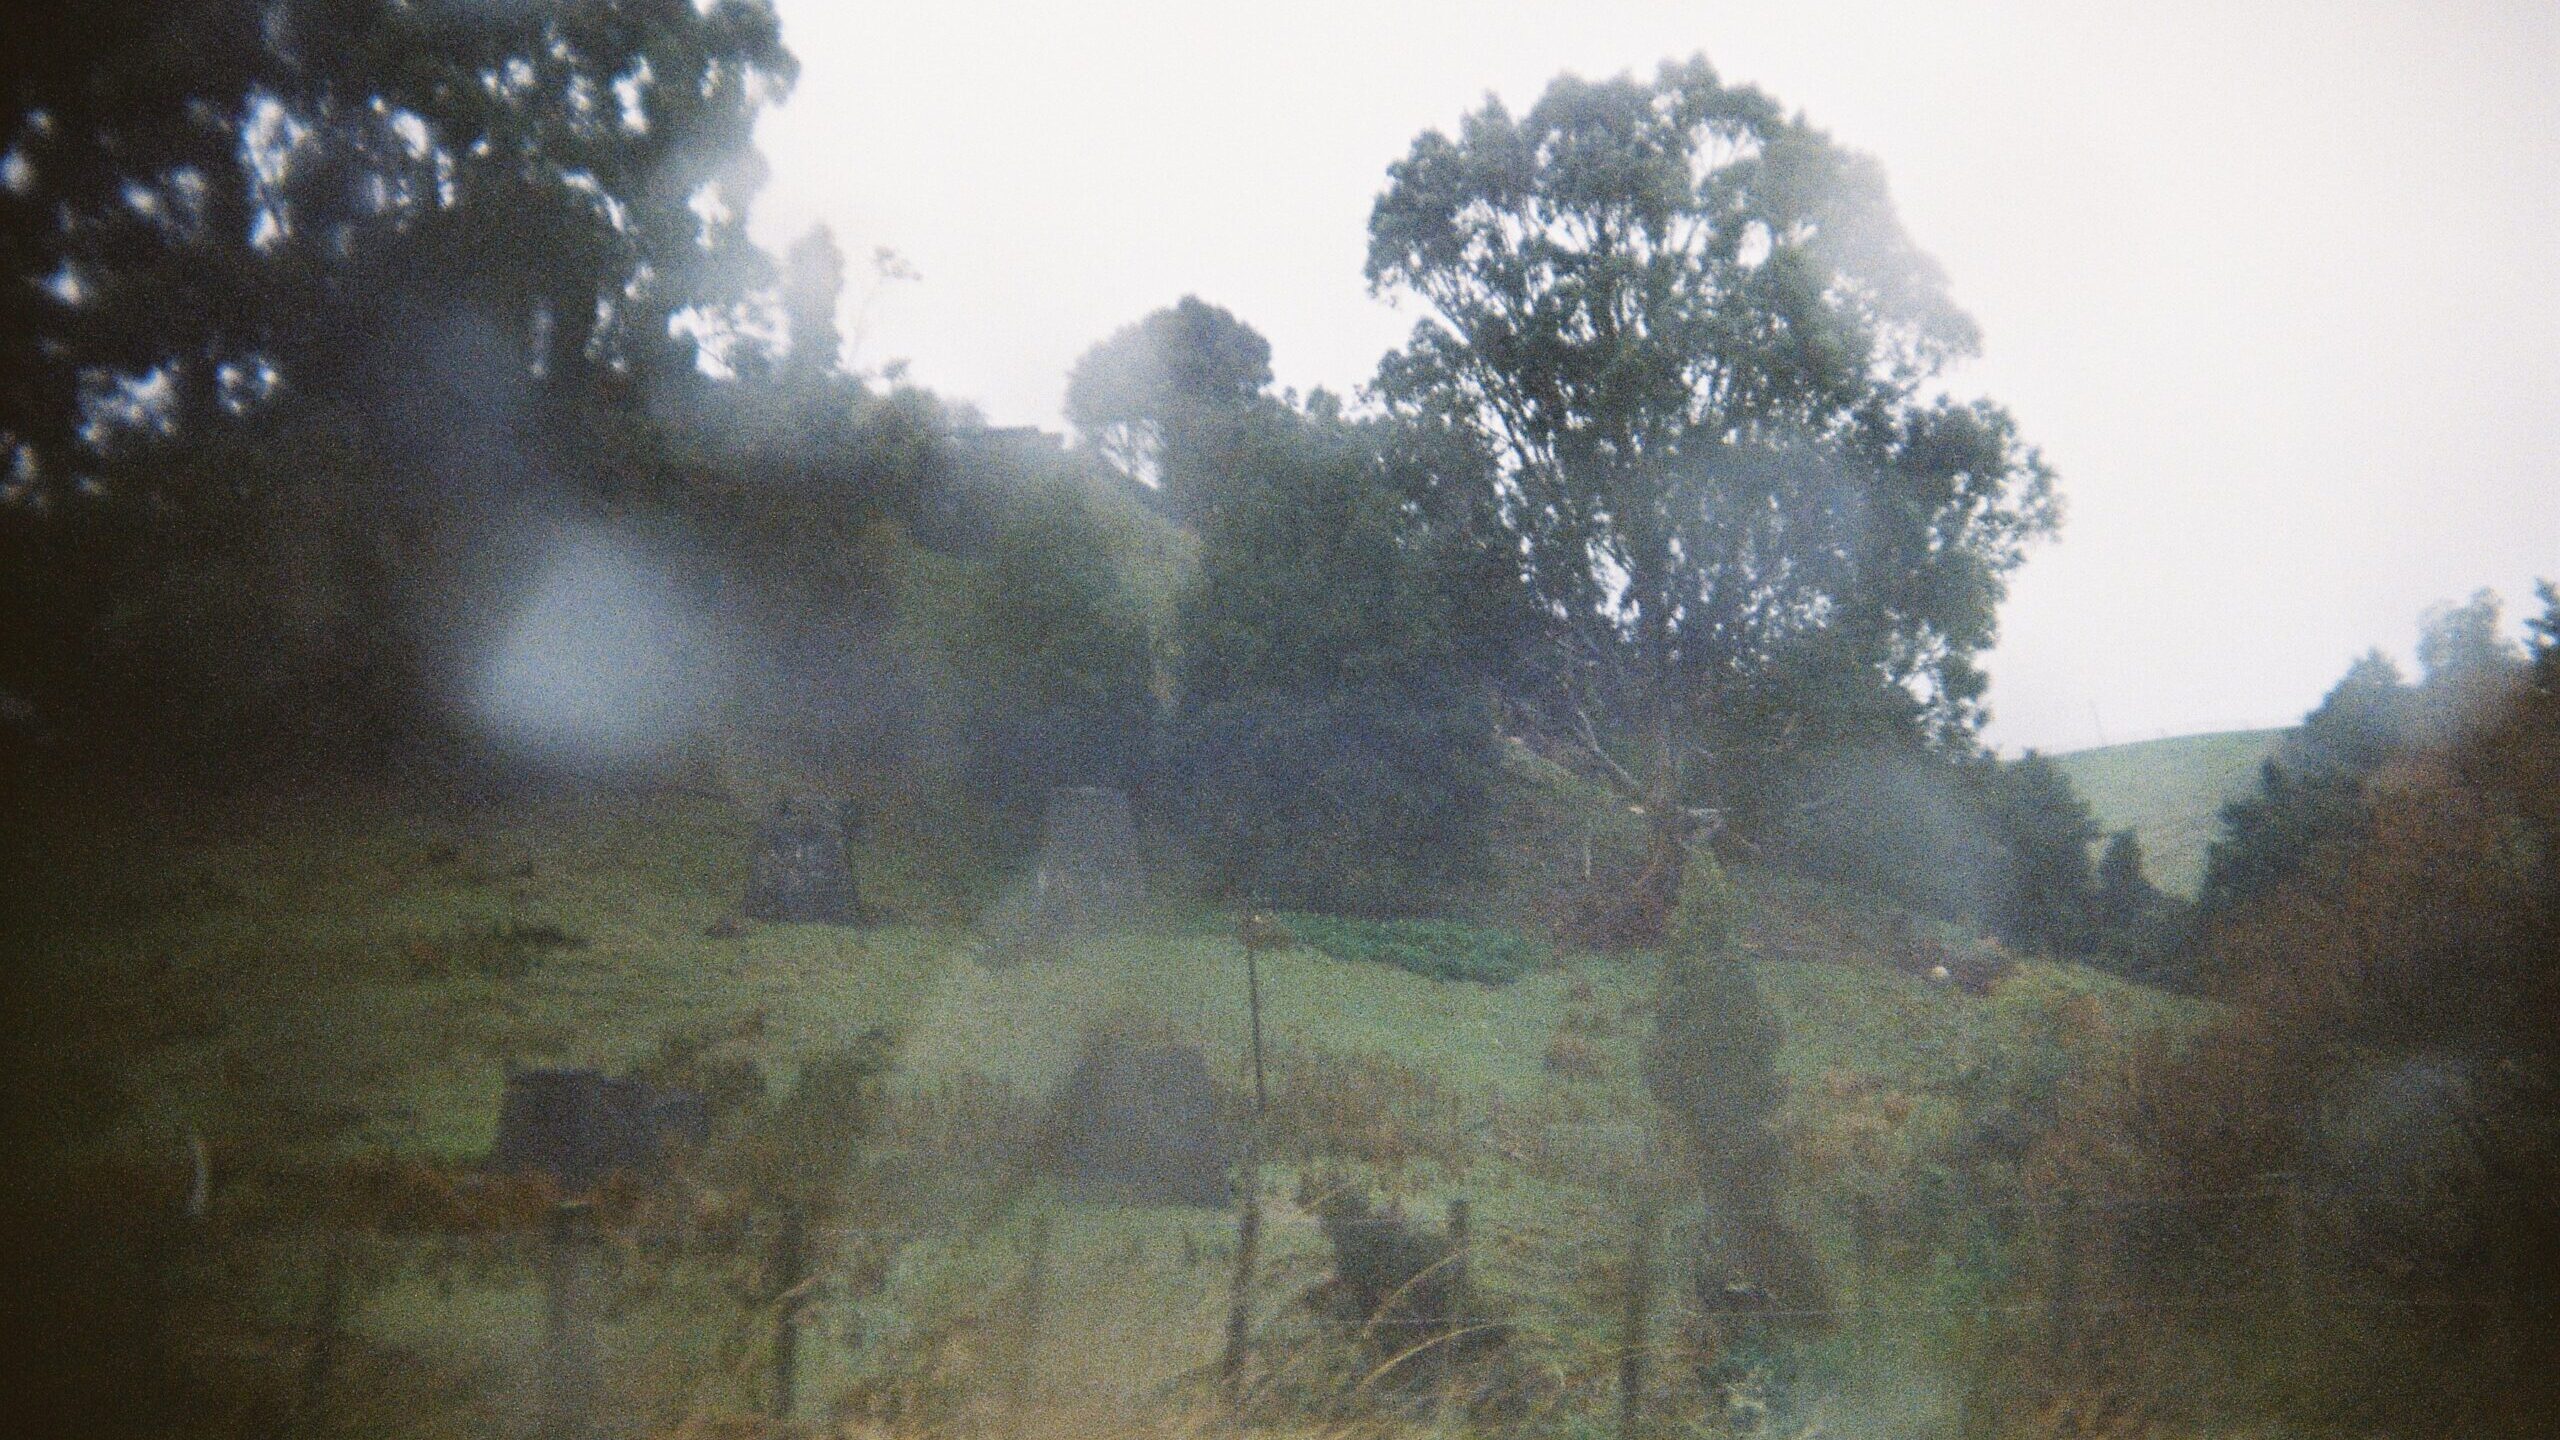 A rural scene is obscured by moisture and condensation on the lens.